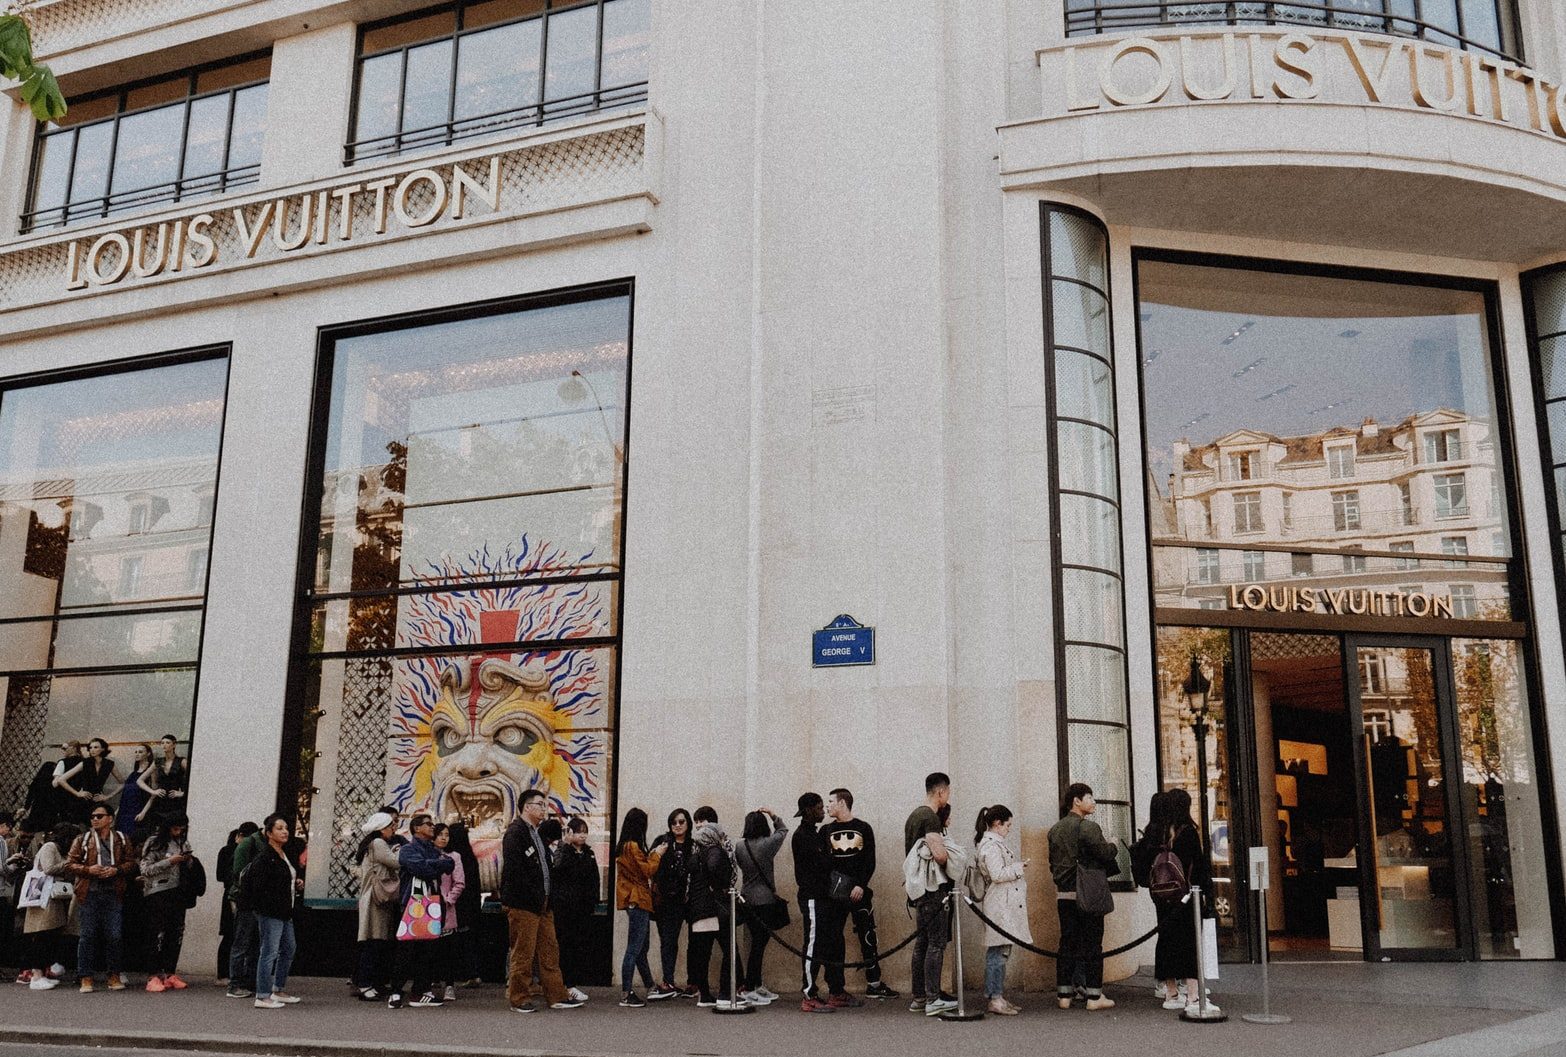 DEGIRO on X: Last year LVMH's Louis Vuitton $20 billion in revenue, a  first for any luxury brand. This year the luxury group reached another  milestone by becoming the first European company